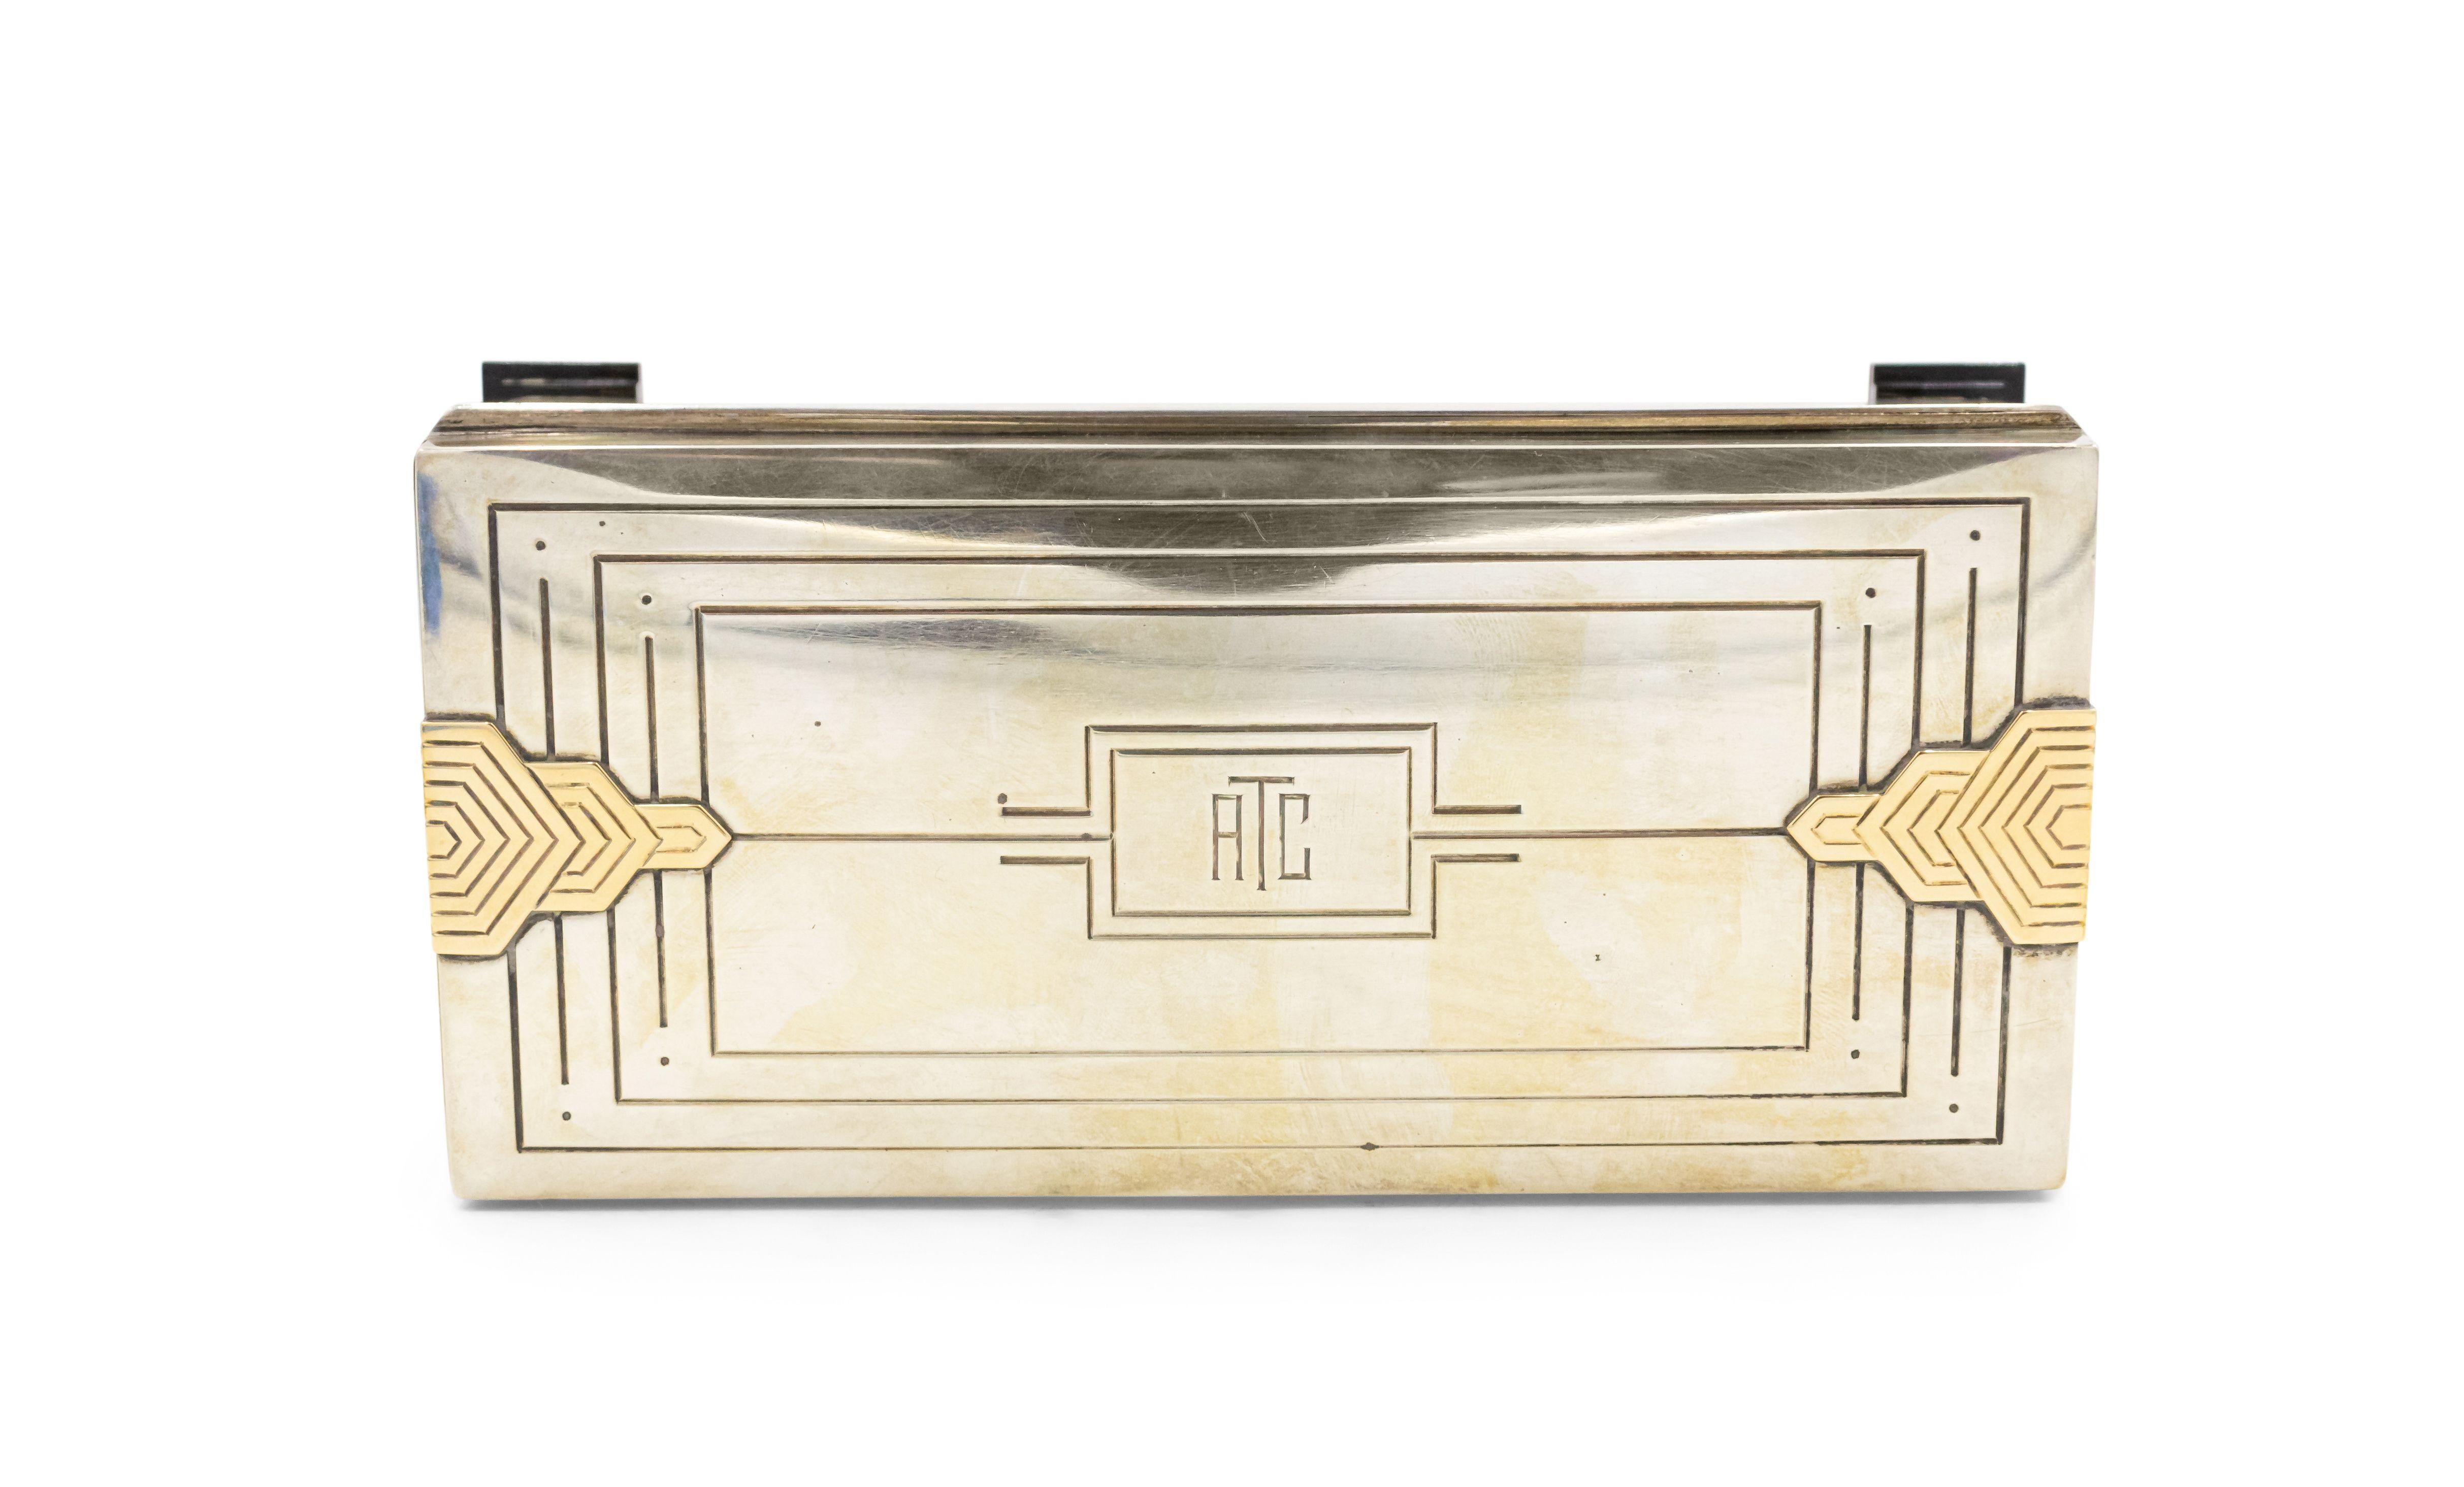 English Art Deco sterling silver rectangular box with fluted design and 14 caret geometric trimmed design on sides with initials: ATC on top.
